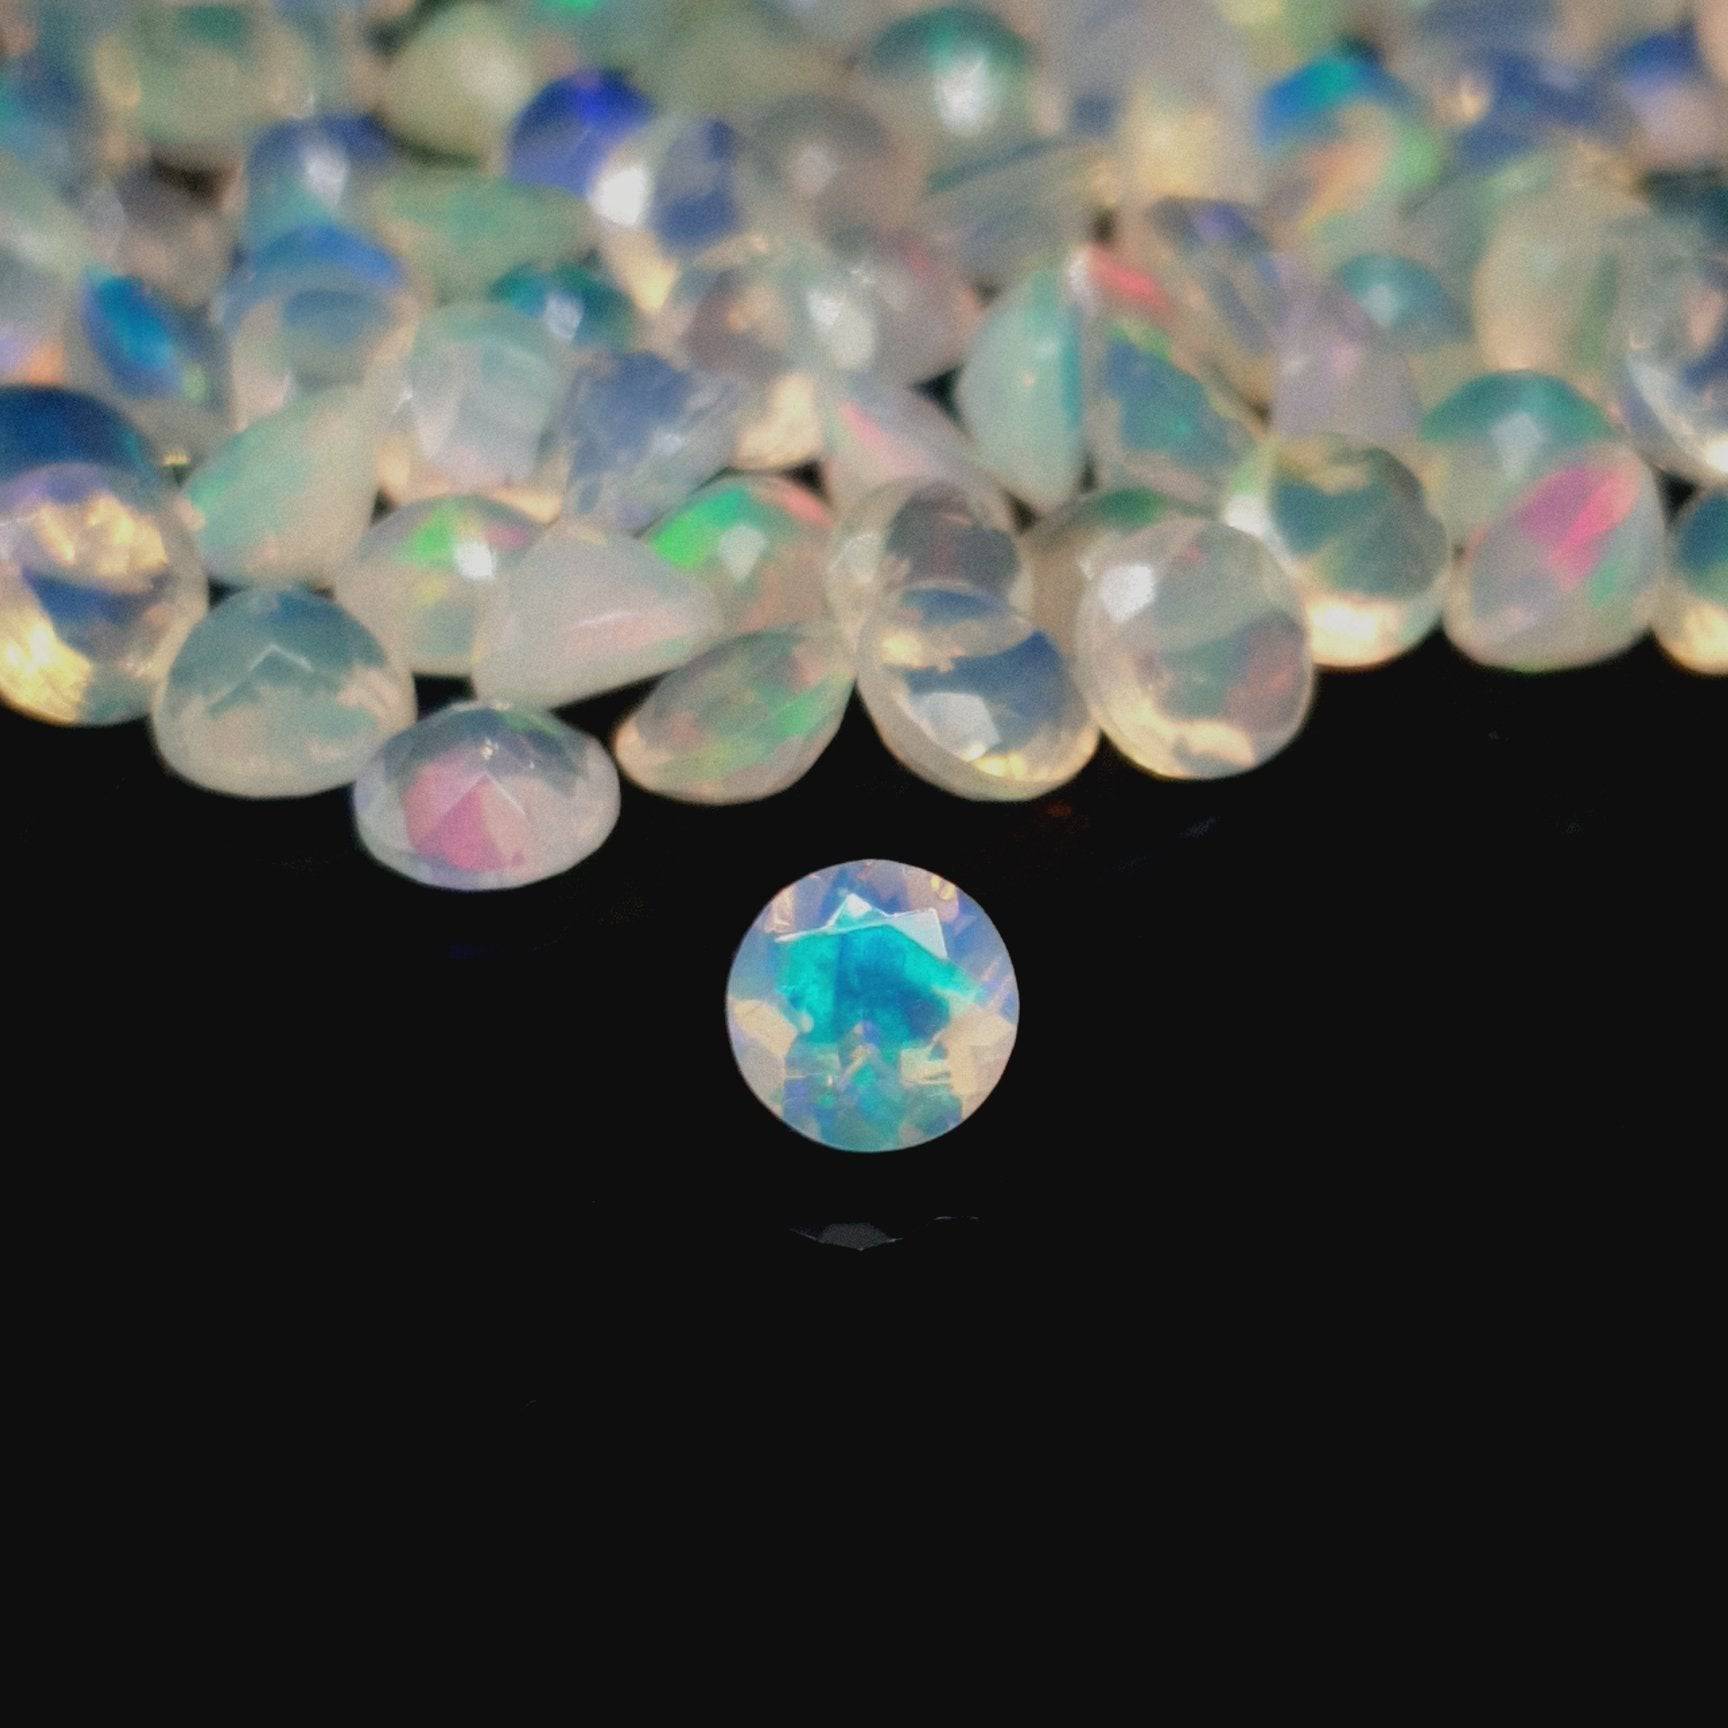 15 Pcs Natural Ethiopian Opals Clear Faceted Lot| 5mm and 6mm Size - The LabradoriteKing